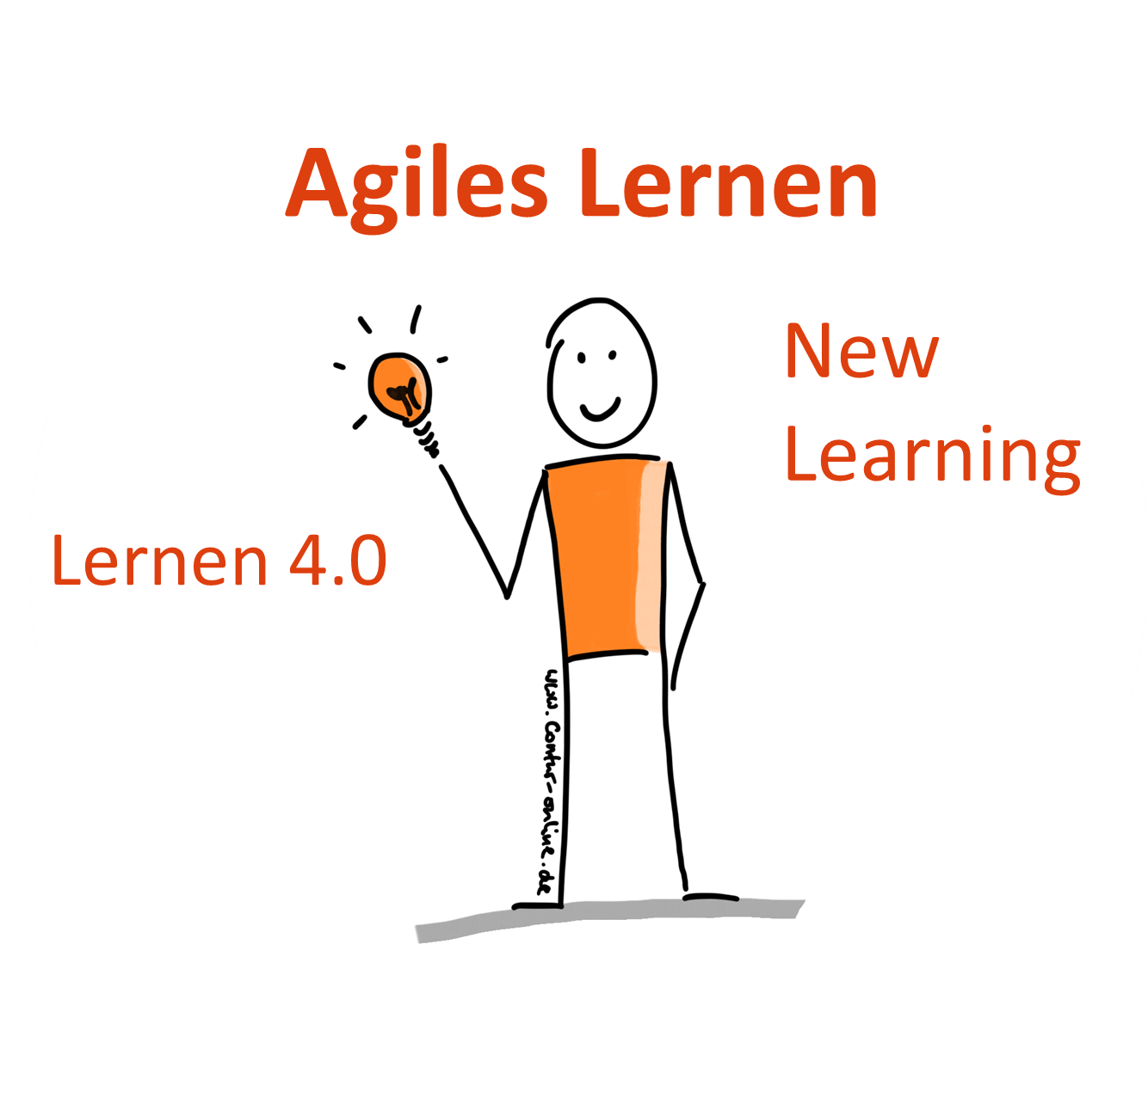 agiles lernen lernen 4.0 new learning